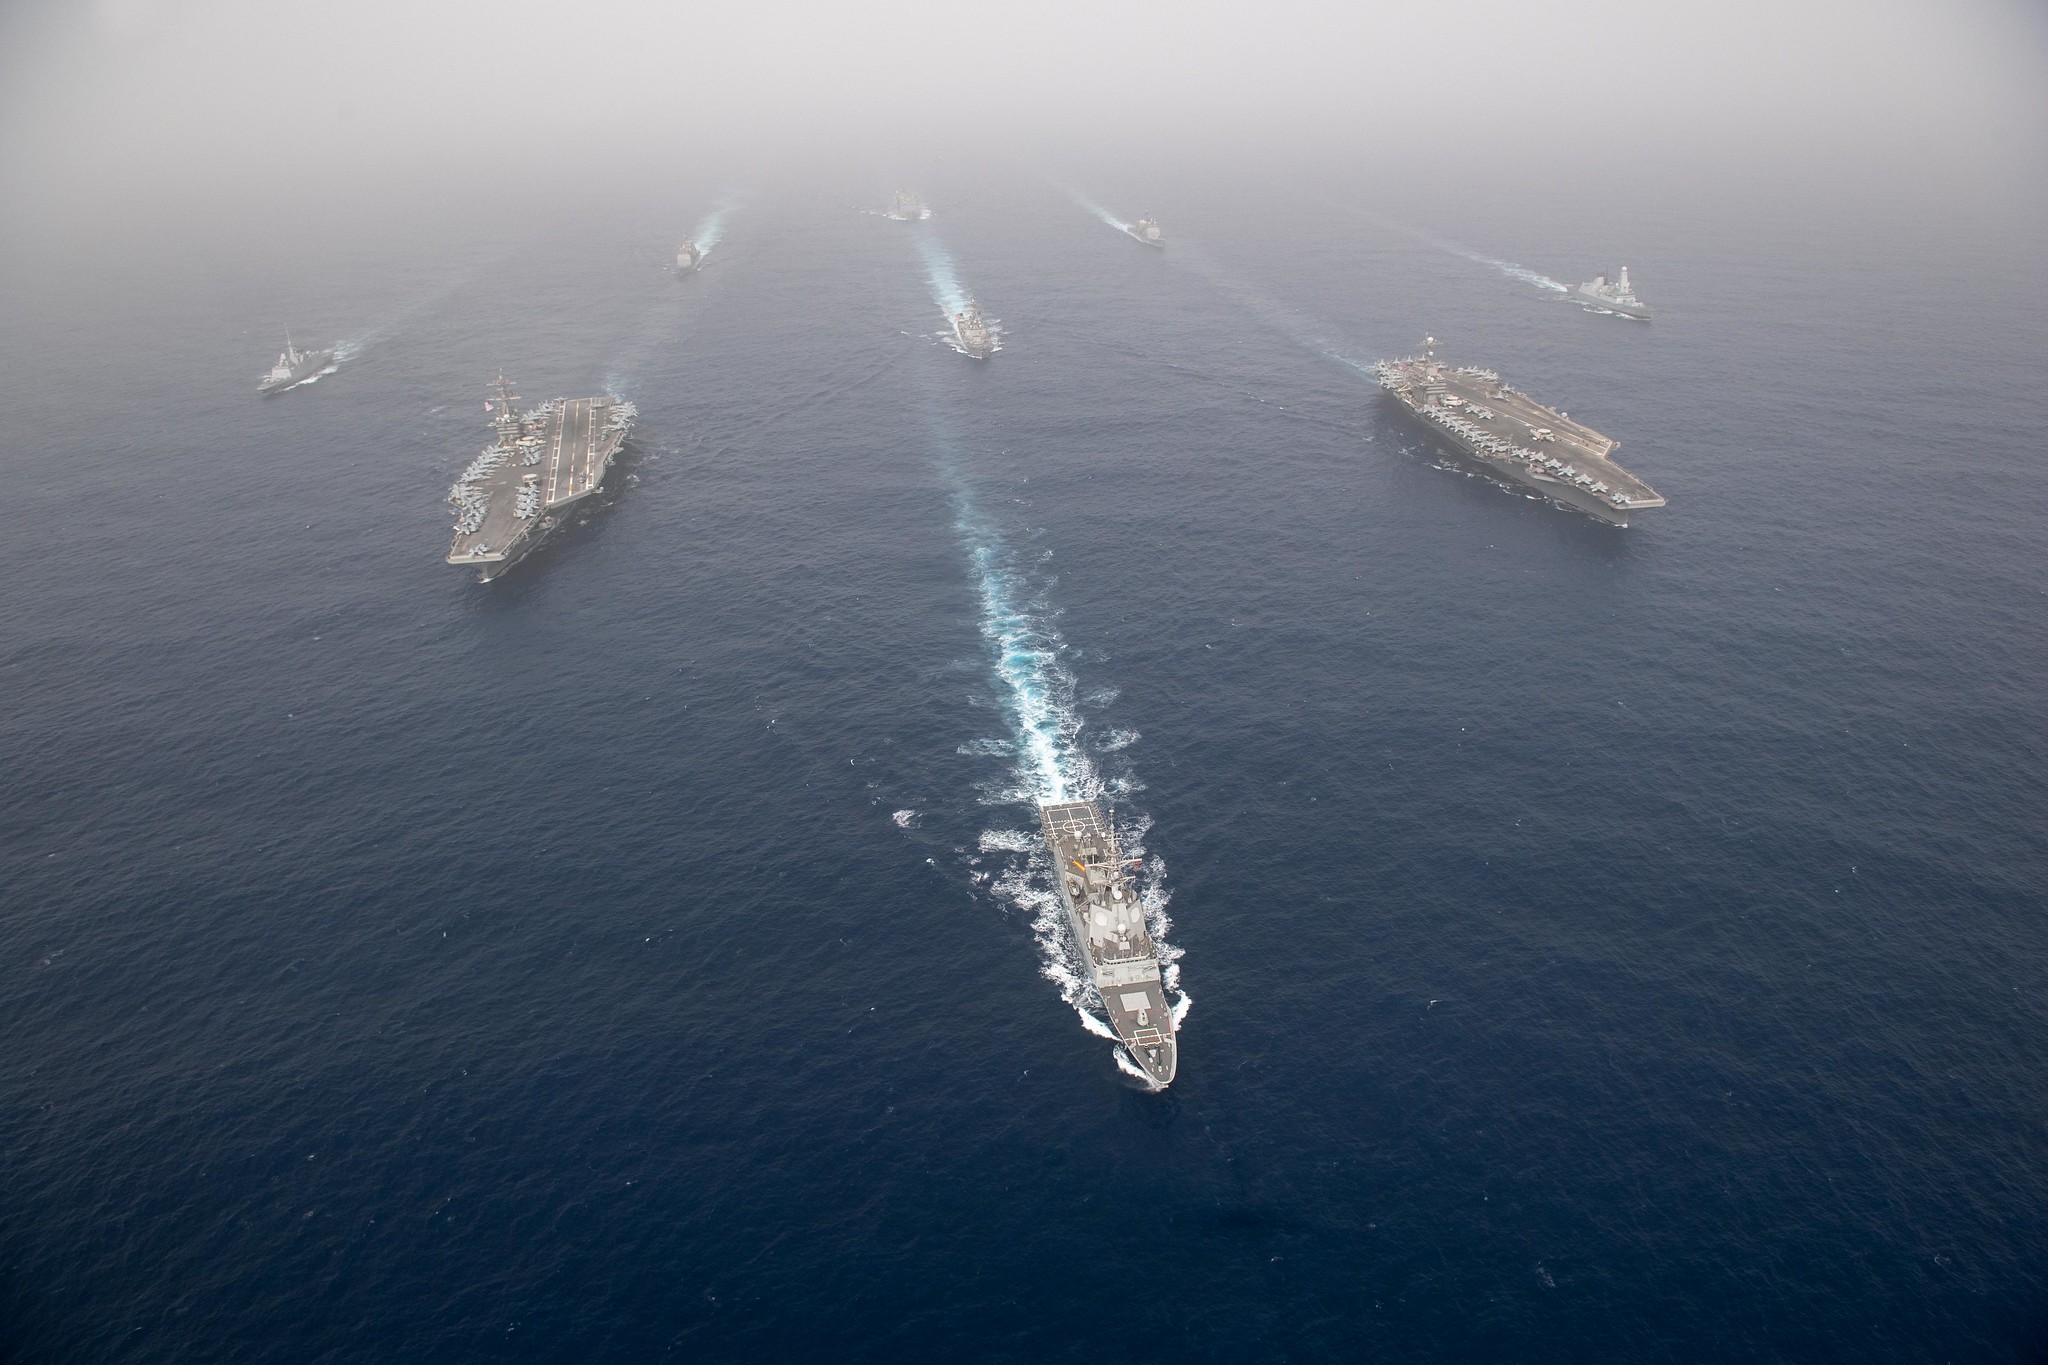 Allies Diplomatic Note To Moscow: 2 Carriers, 7 Ships, 1 Ambassador